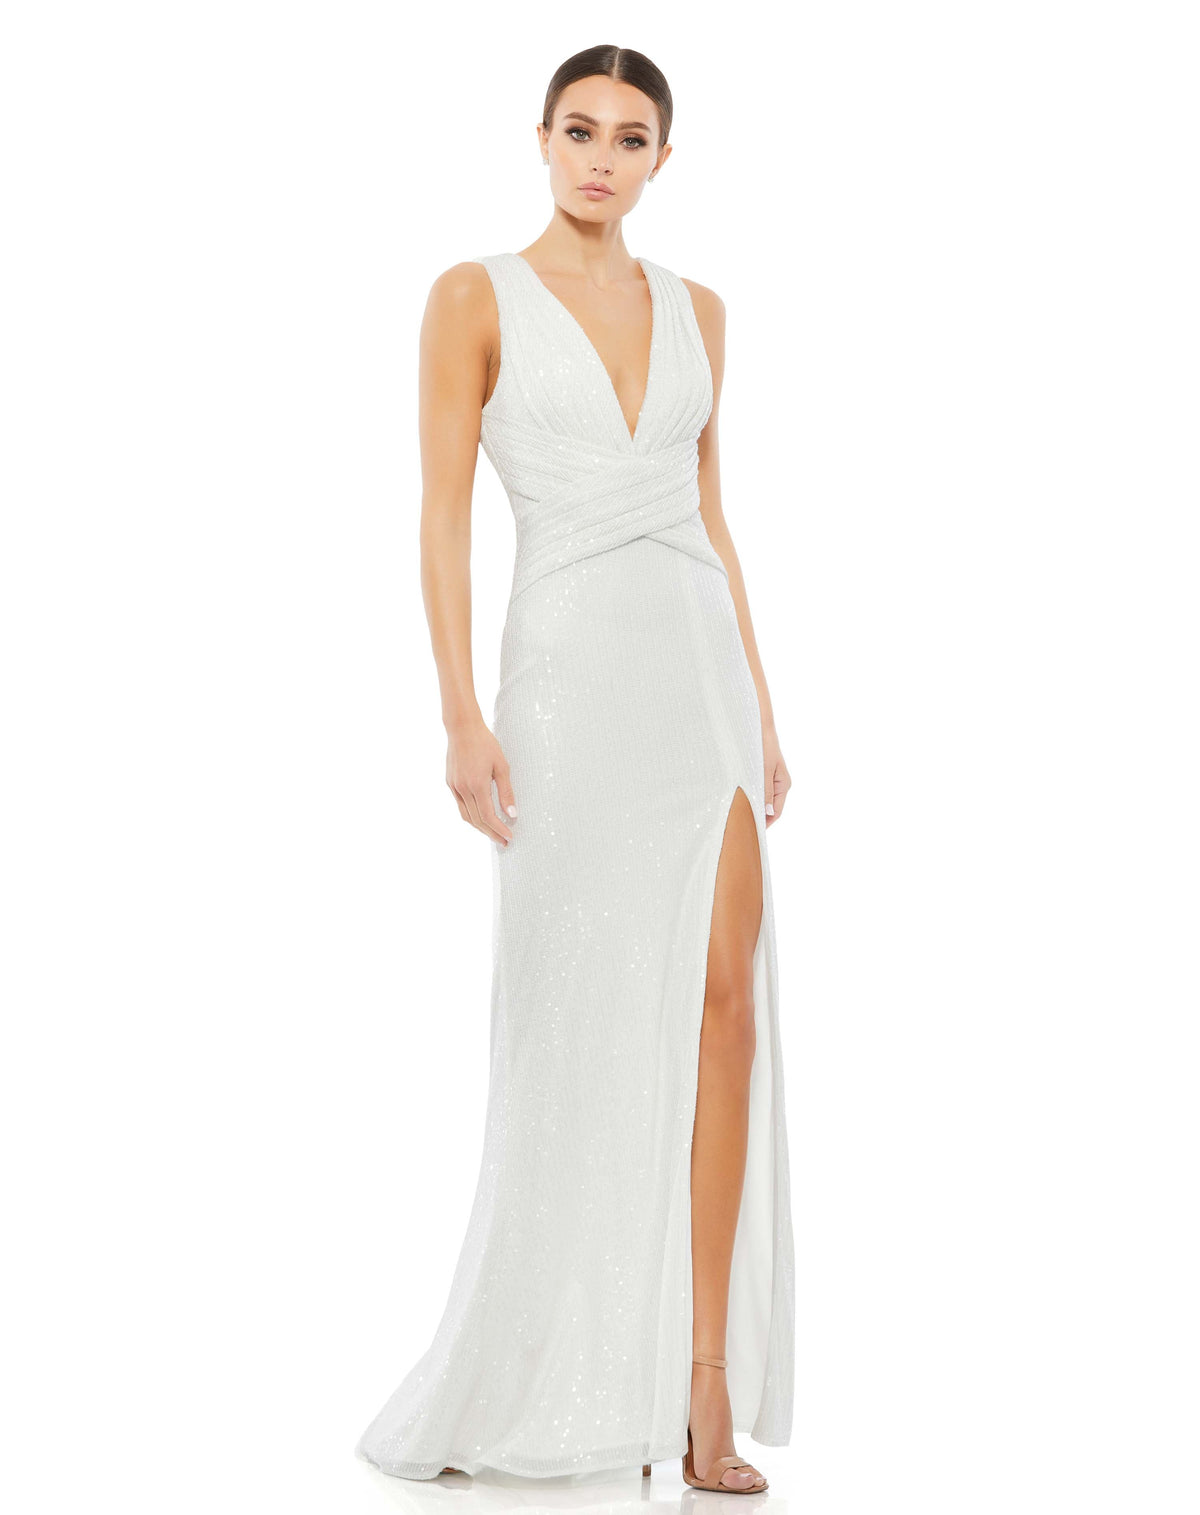 This elegant Mac Duggal, long, white, floor-length sequined gown with a plunging v-neckline, wrap waist, and a thigh-high slit. This elegant evening dress is the perfect dress perfect for proms, black-tie affairs, weddings and special events!